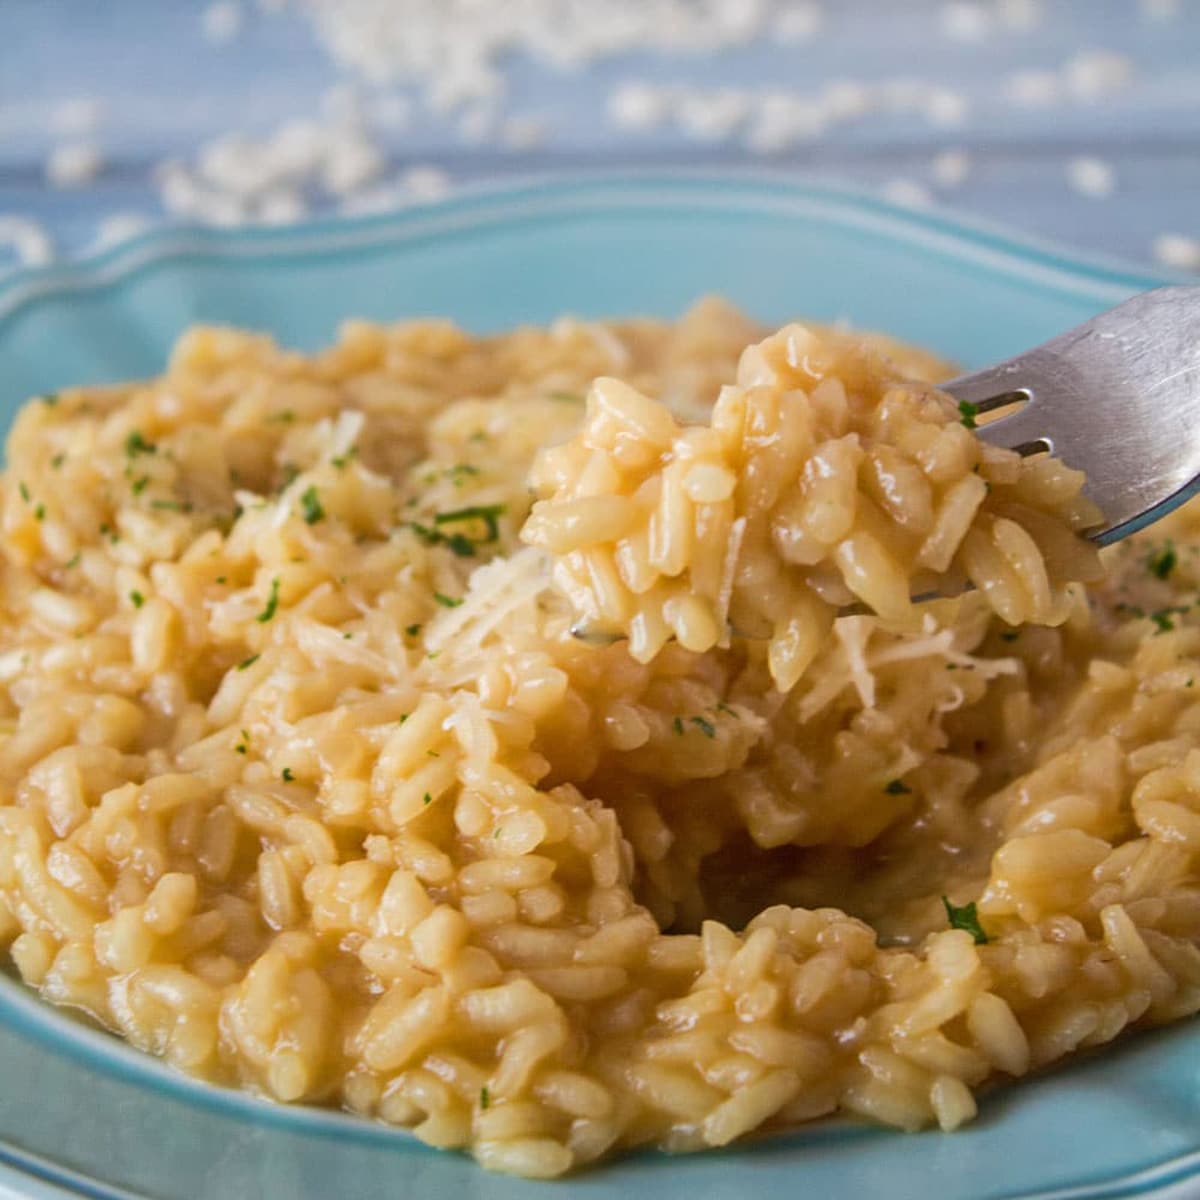 Square image of a plate of Parmesan risotto.